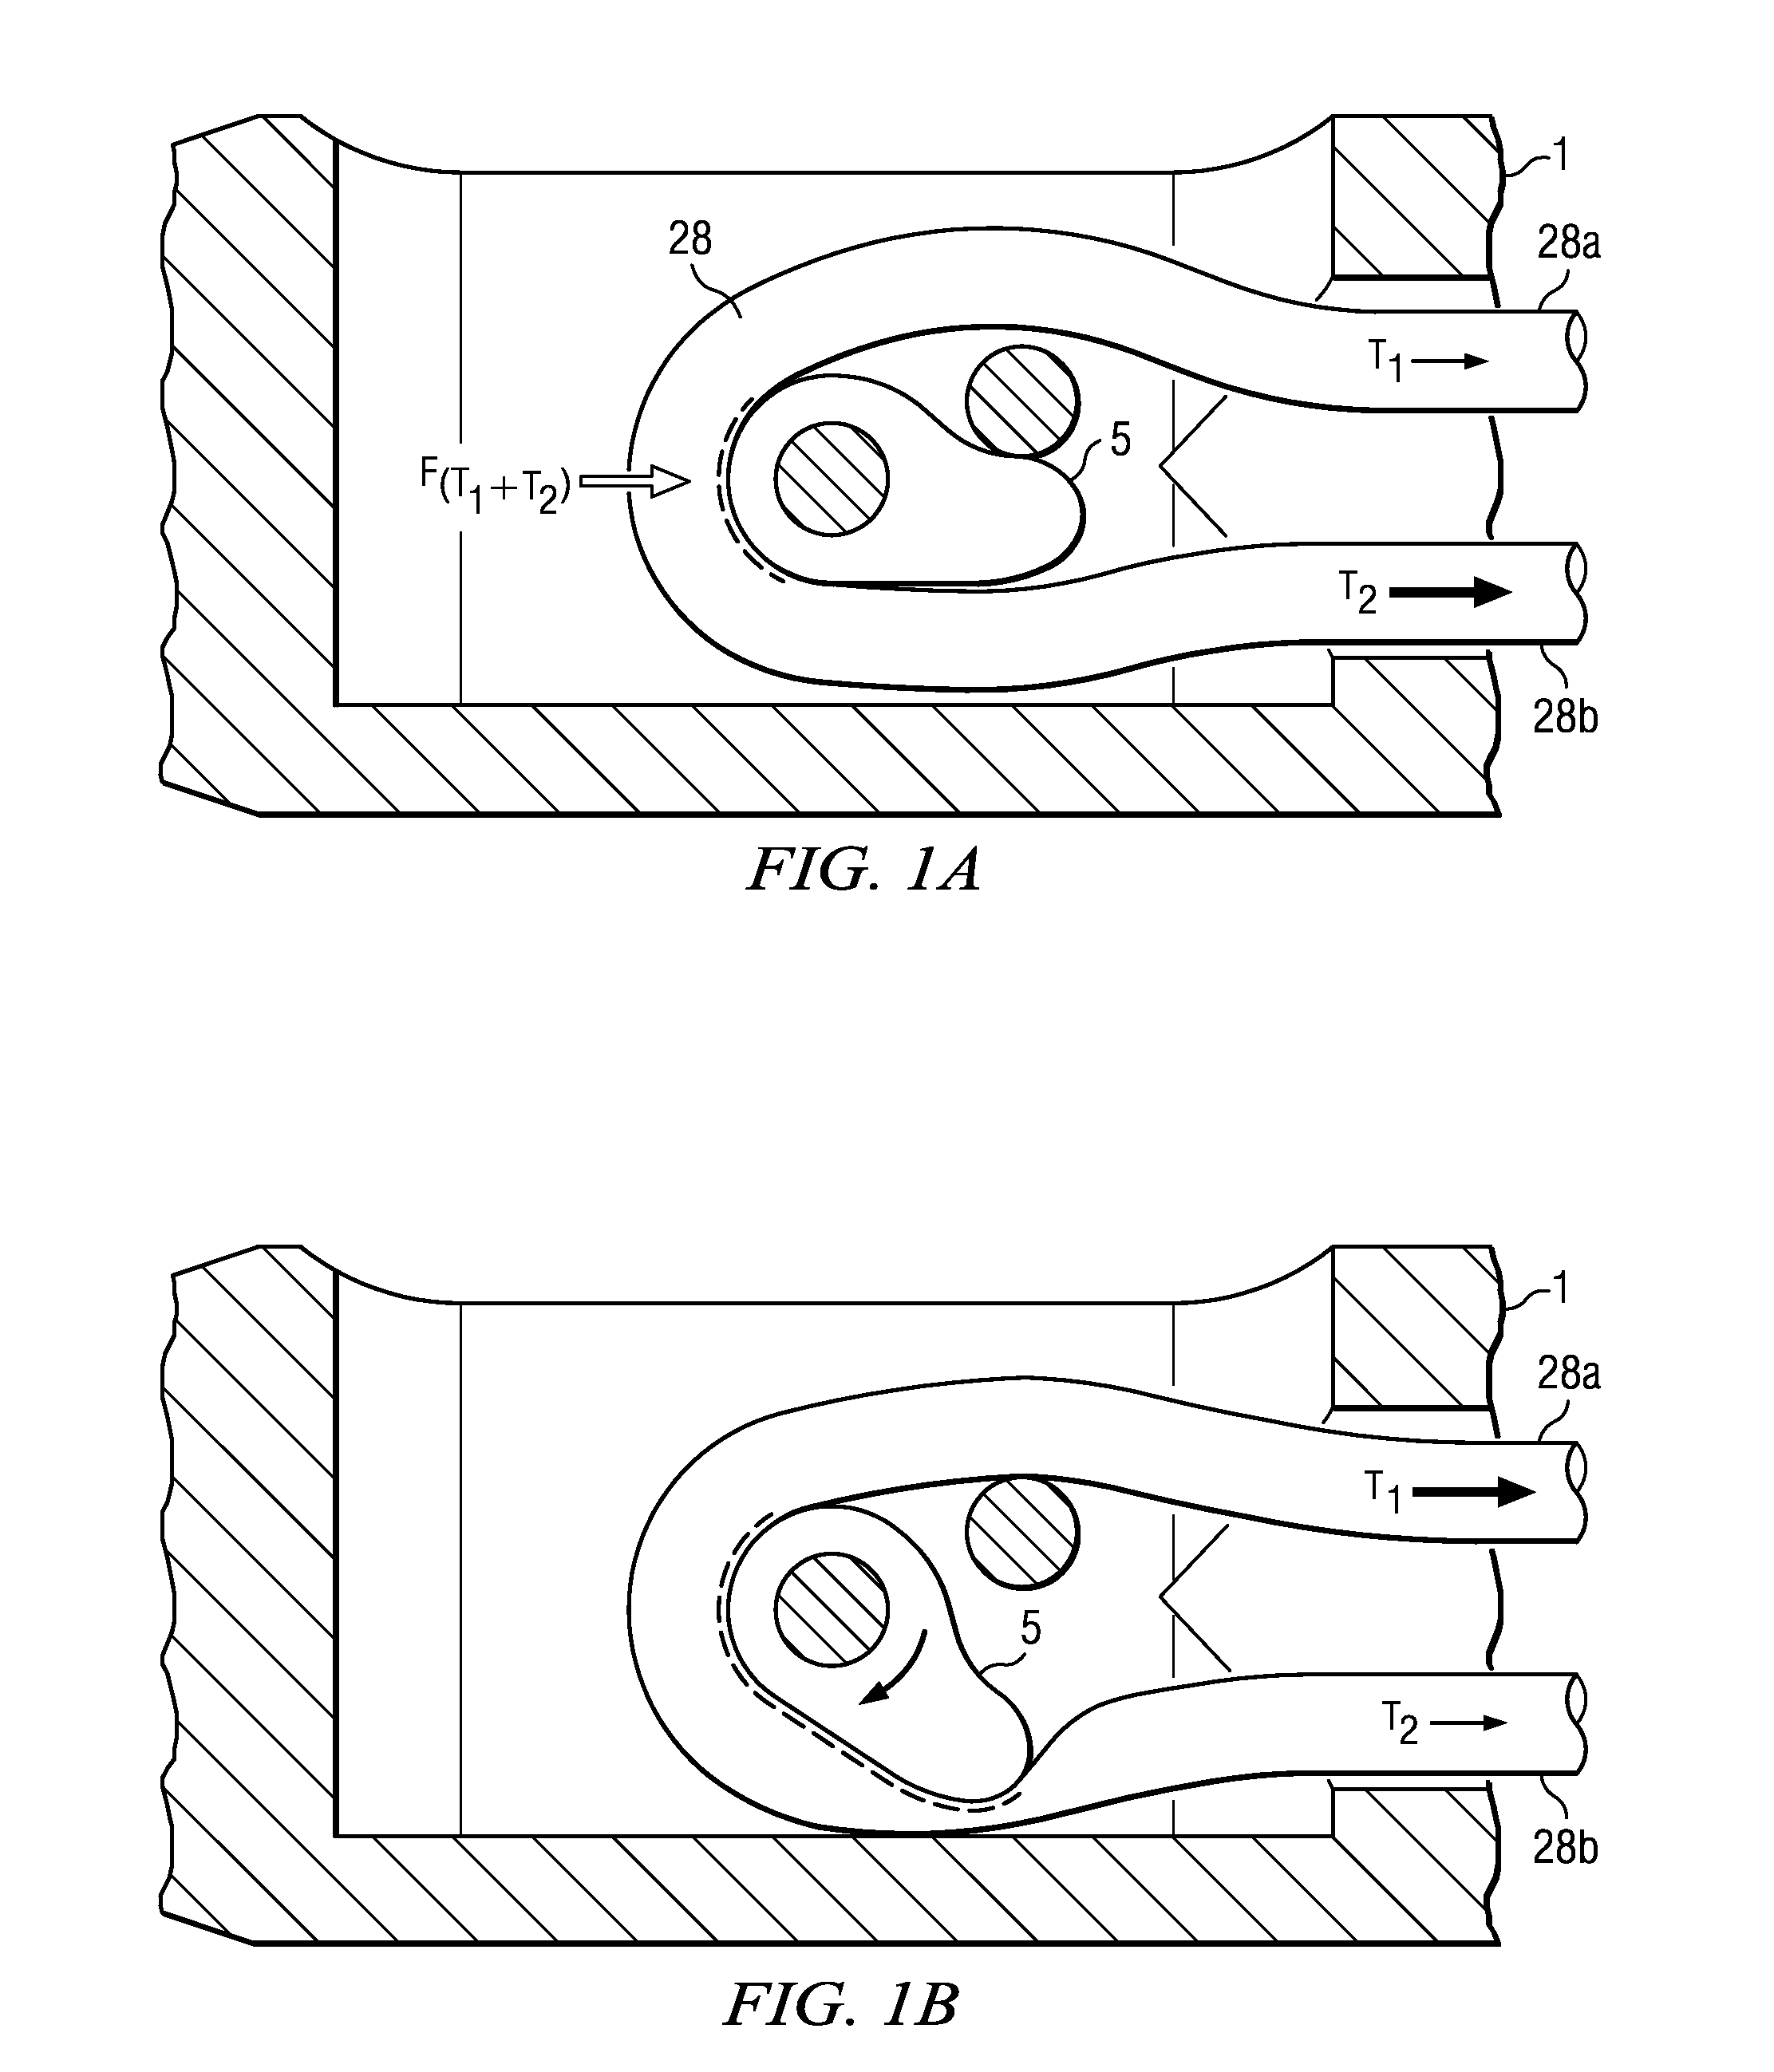 Restricted wedge suture anchor and method for soft tissue repair